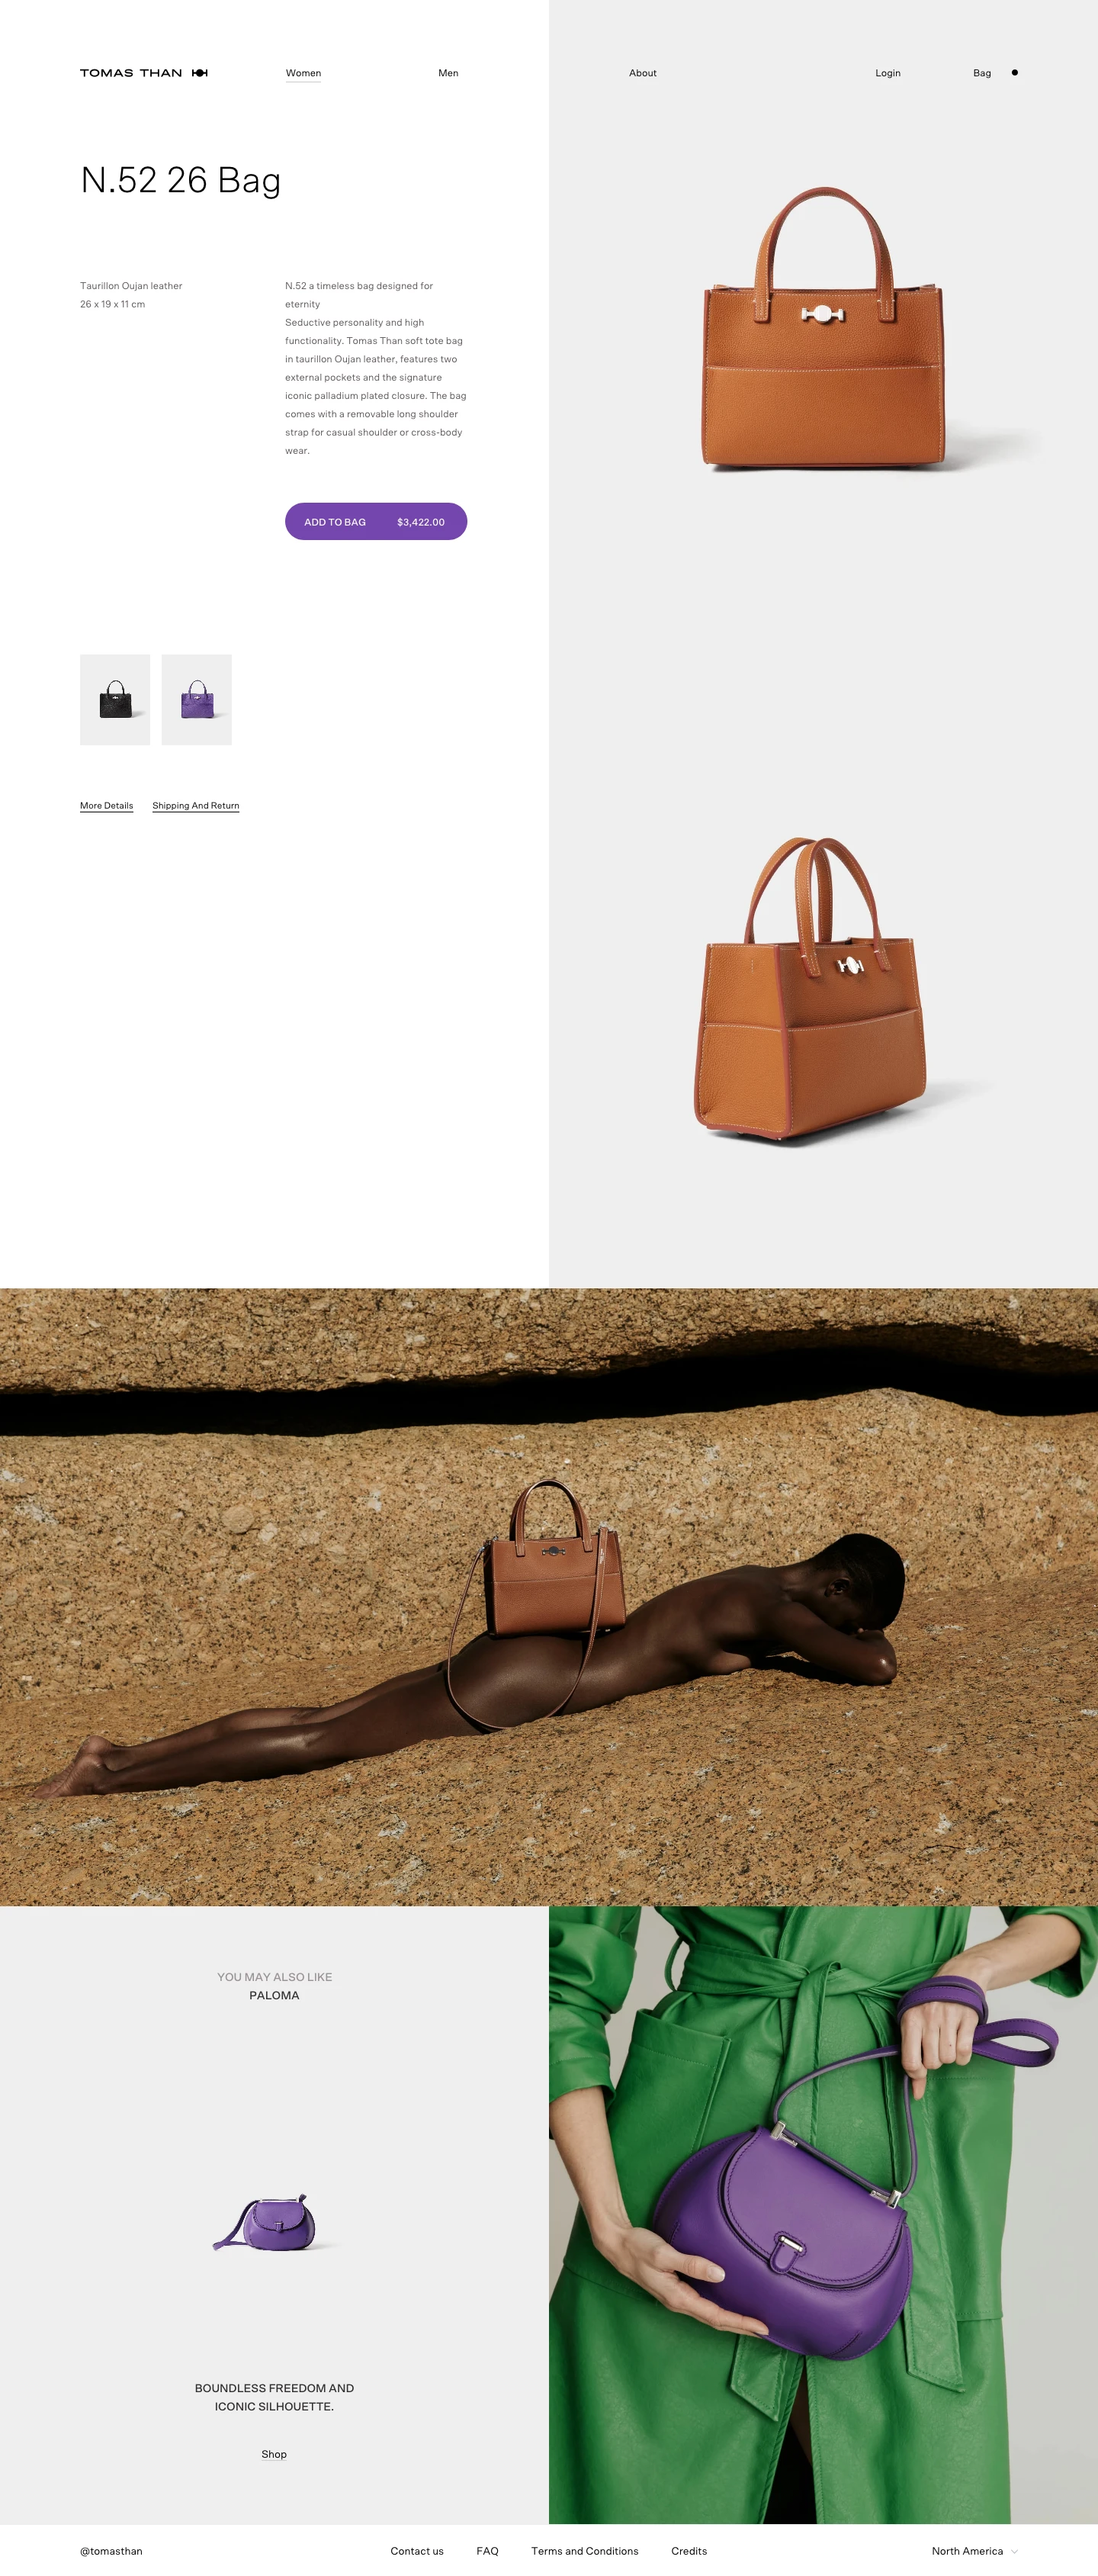 TOMAS THAN Landing Page Example: The Italian luxury handbags brand Tomas Than was founded by his creator and designer Tomas Than in 2014 in Milan. He began designing from his passion of beauty and grace, a feeling of absolute sartorial, hand-made and timeless items experienced through shapes and colours. A pure expression of timeless grace and imposin.